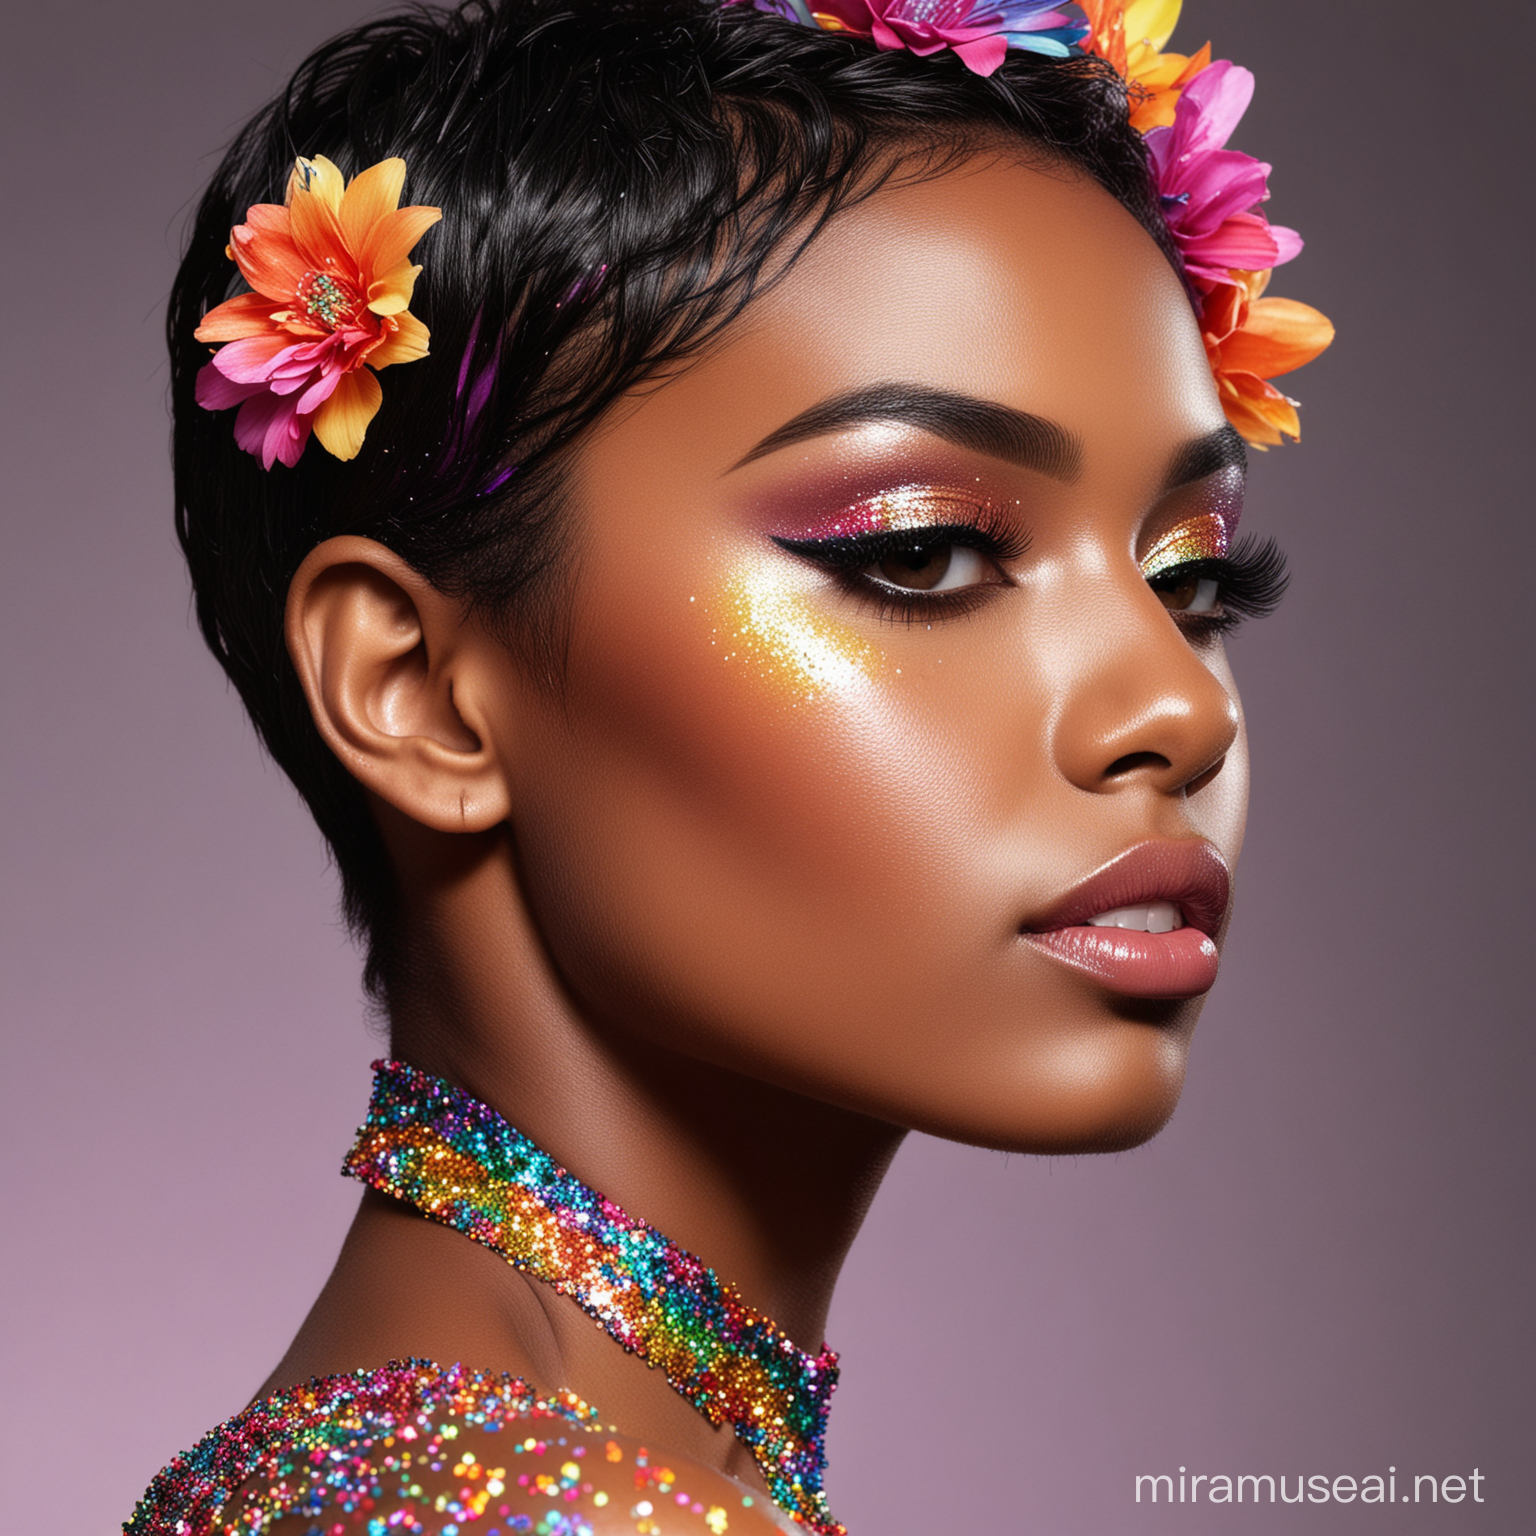 black model, short hair, beauty shot close up, side profile, rainbow colored glitter, big colorful flowers, flawless skin tone